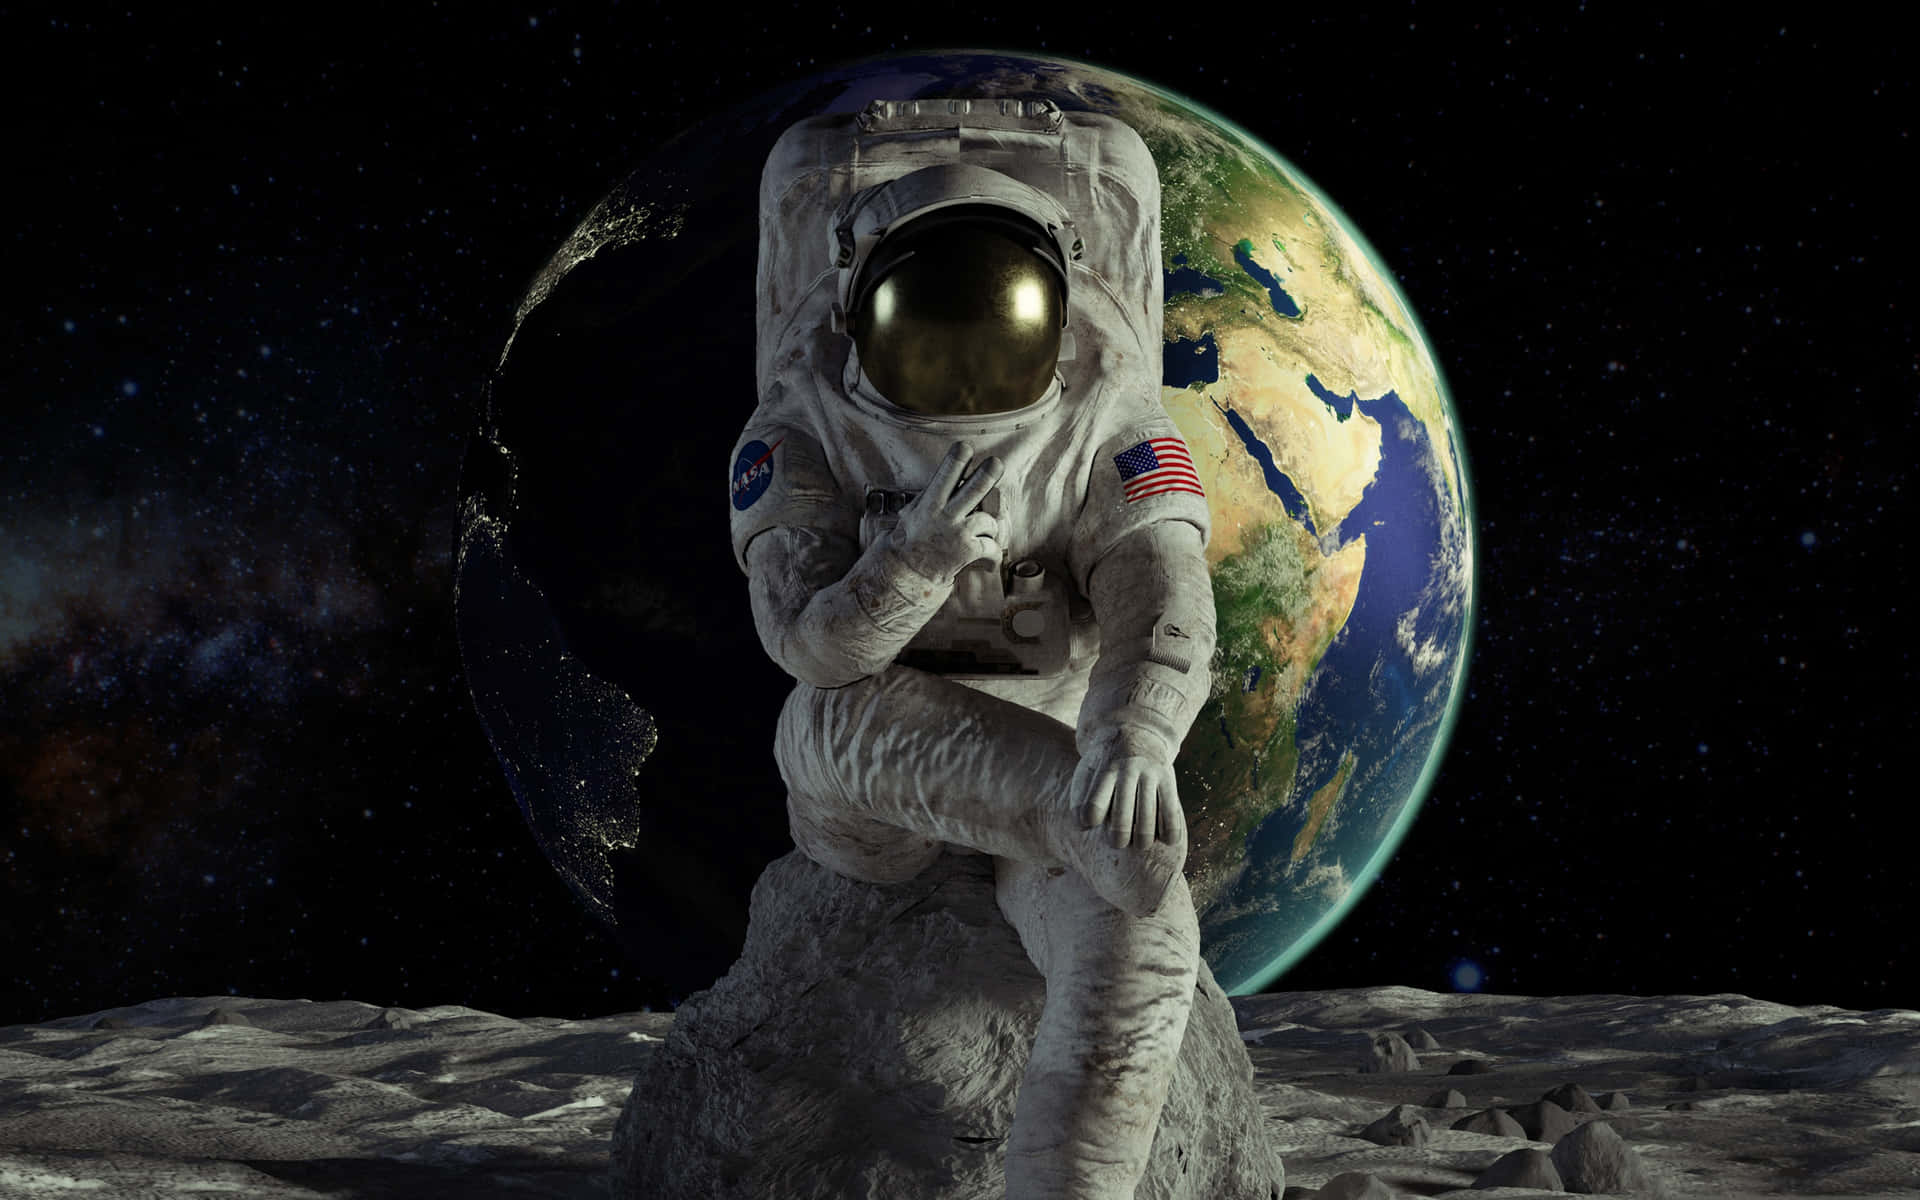 "An inspiring view of a lone astronaut surveying the vast expanse of space." Wallpaper